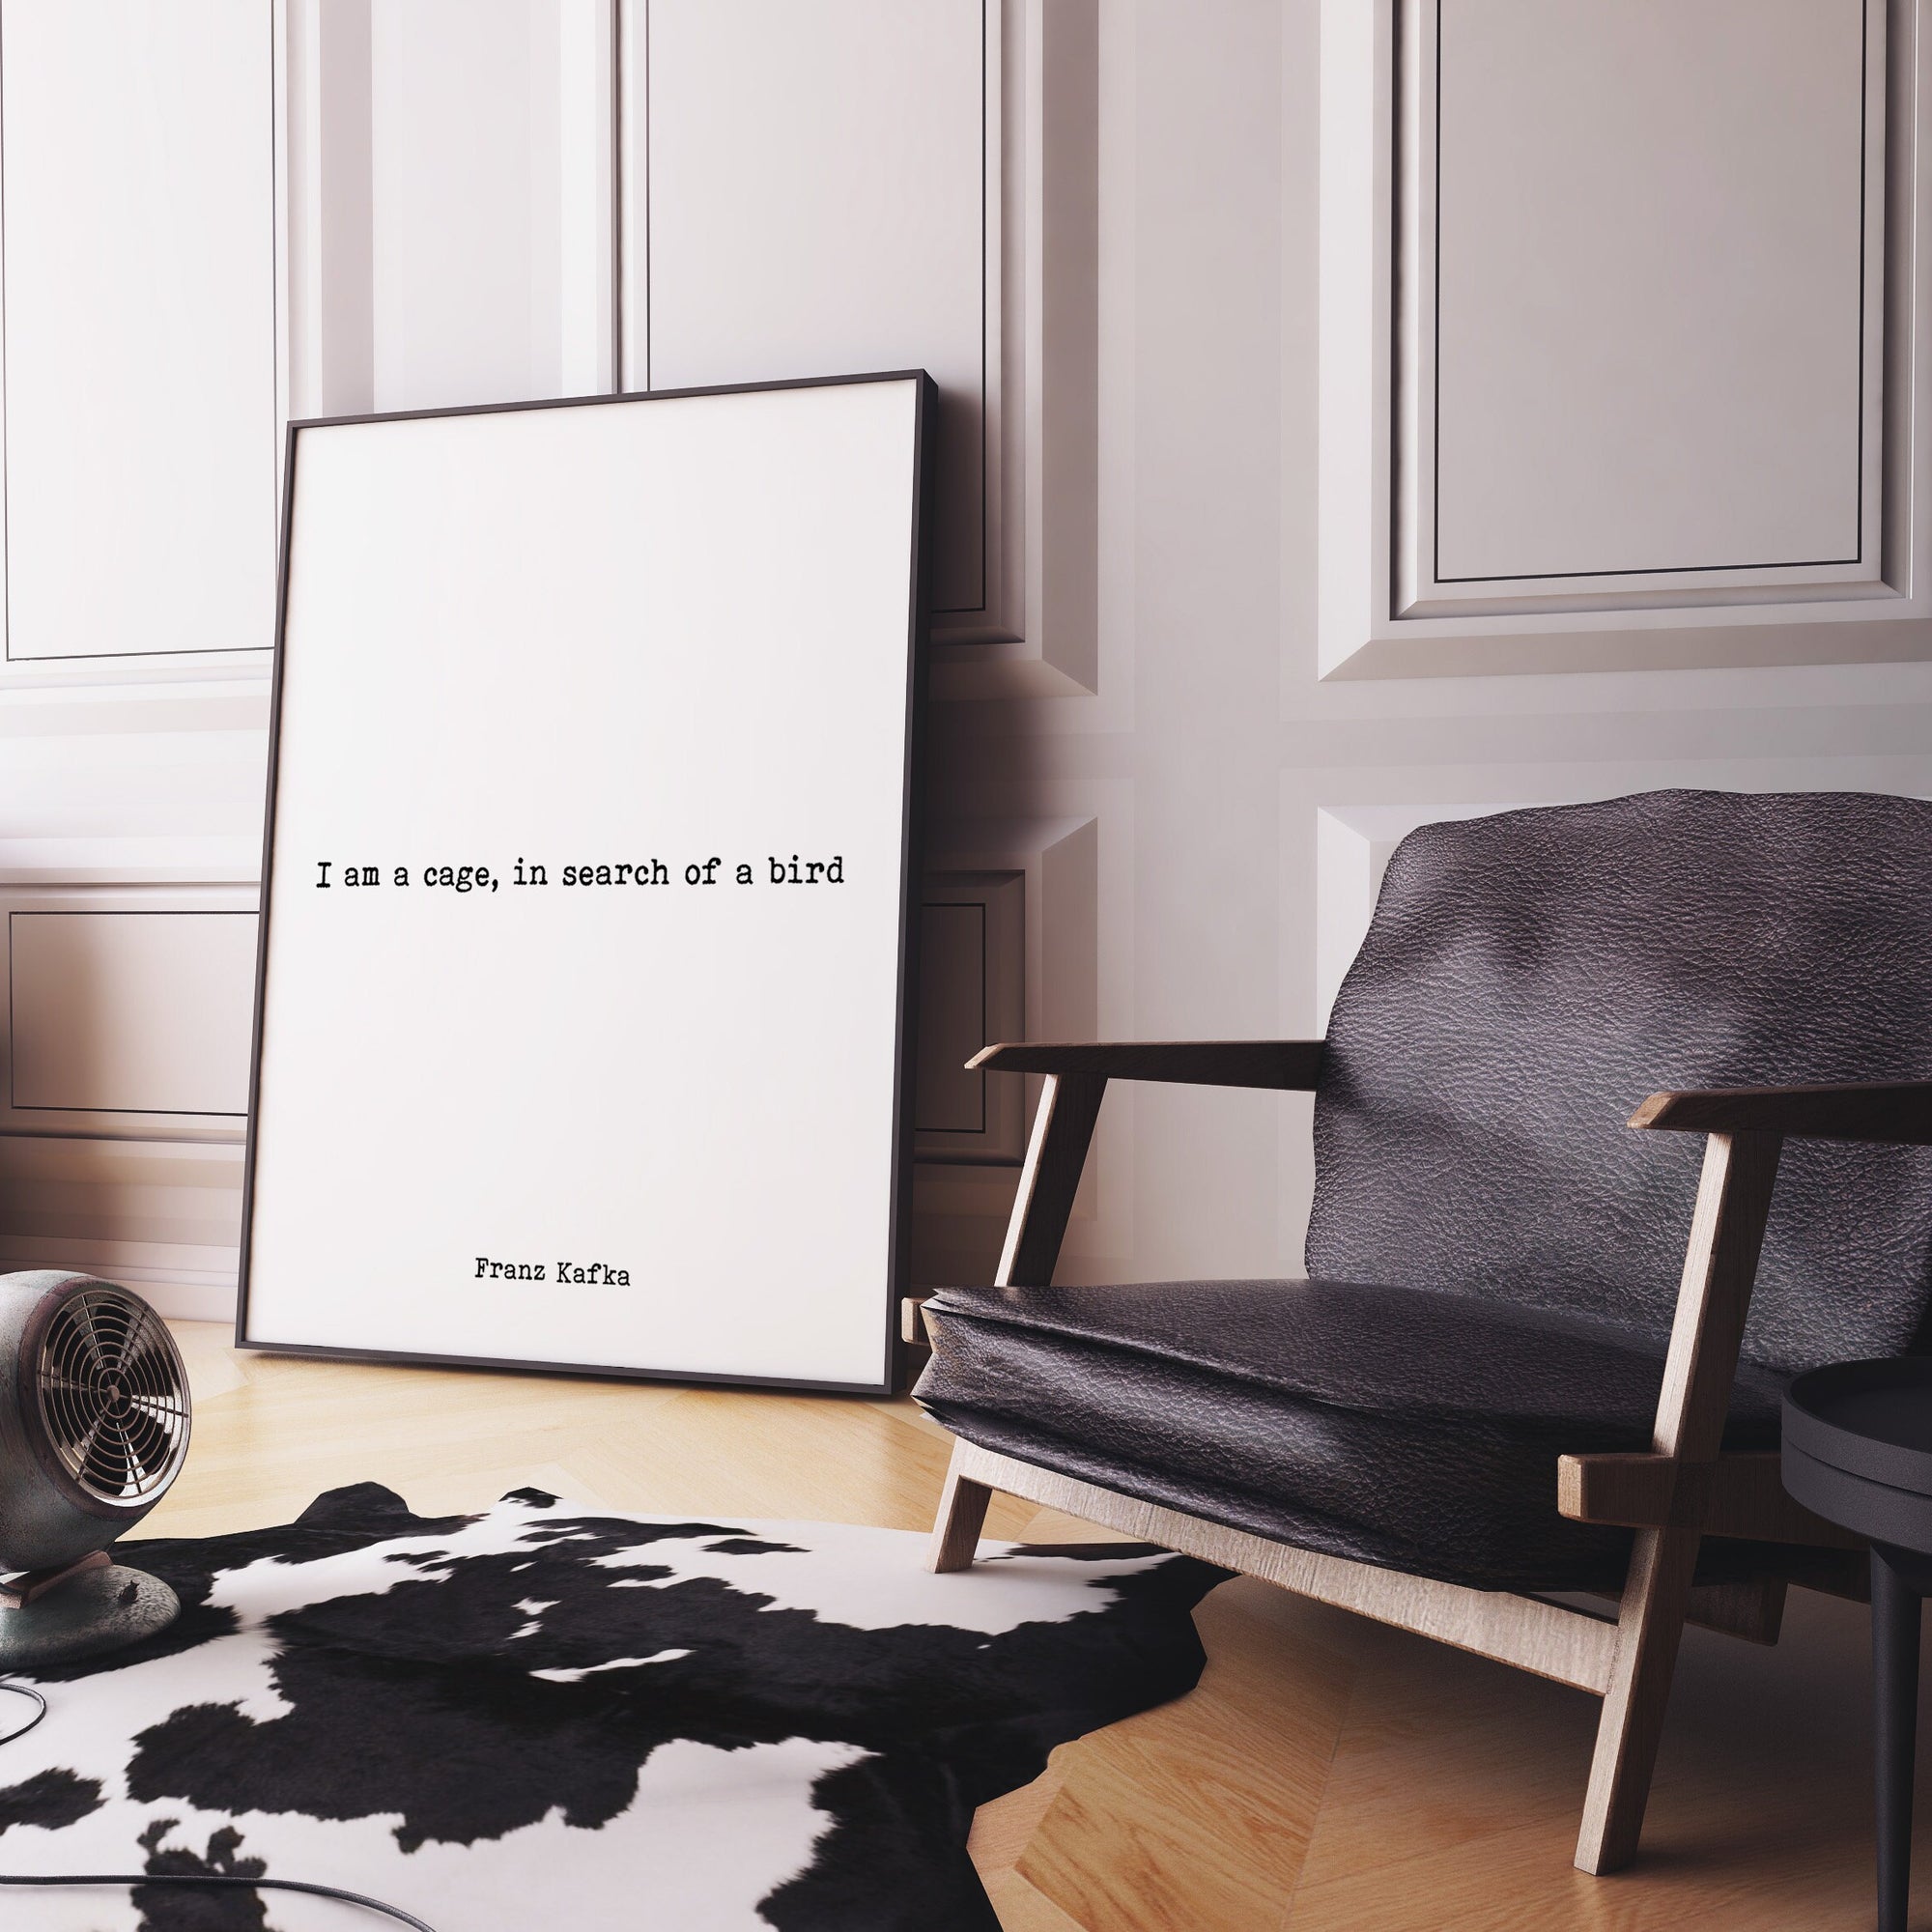 Franz Kafka Literary Quote Print, I am a cage in search of a bird